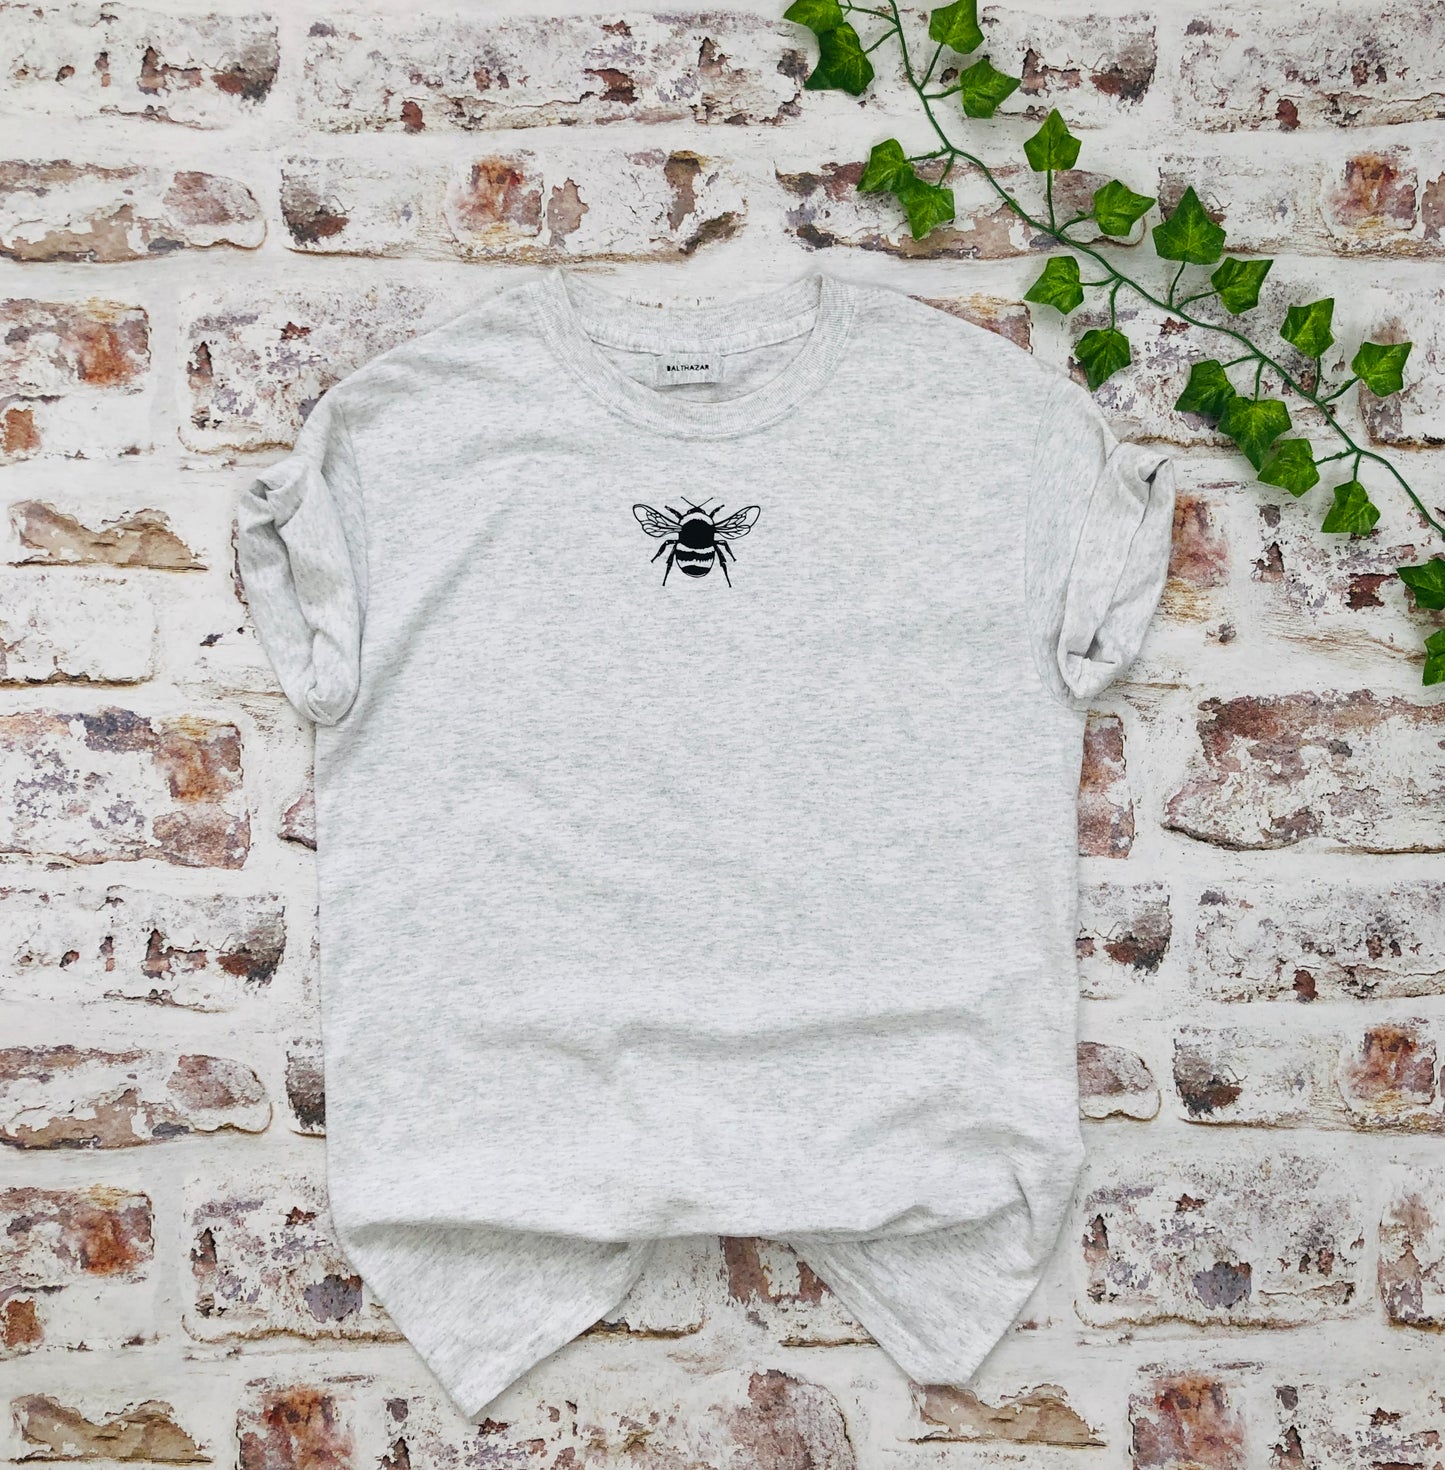 The Bee T-shirt